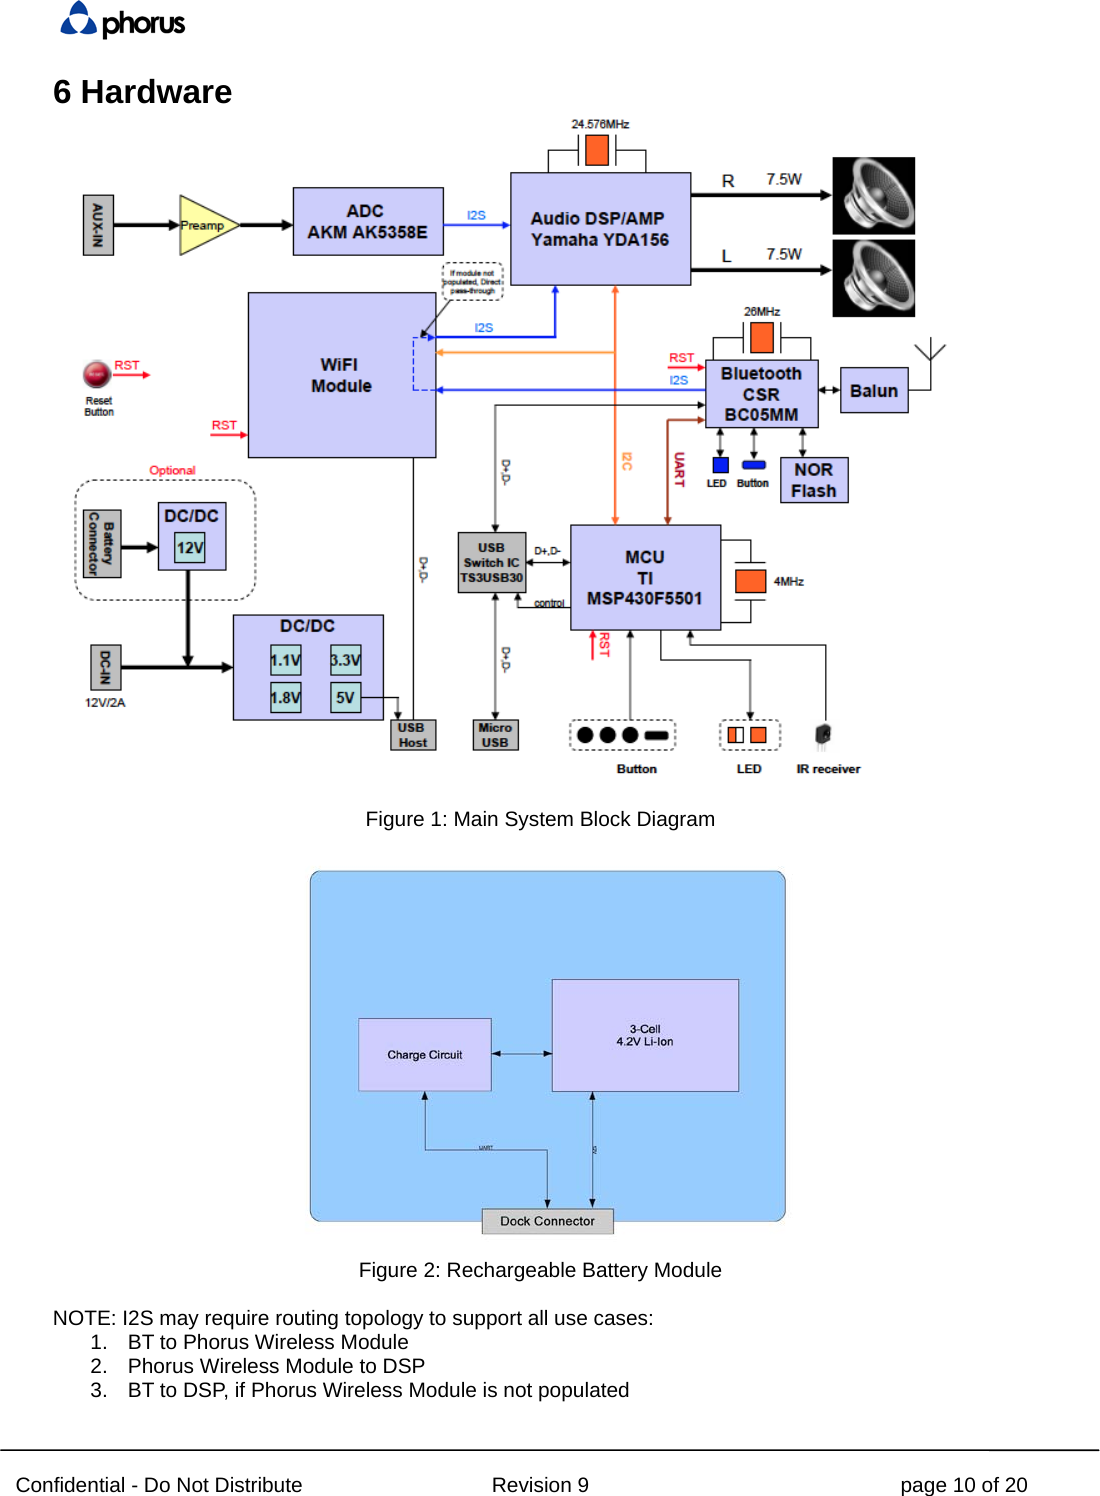  Confidential - Do Not Distribute Revision 9 page 10 of 20 6 Hardware   Figure 1: Main System Block Diagram Figure 2: Rechargeable Battery Module  NOTE: I2S may require routing topology to support all use cases: 1. BT to Phorus Wireless Module 2. Phorus Wireless Module to DSP 3. BT to DSP, if Phorus Wireless Module is not populated 